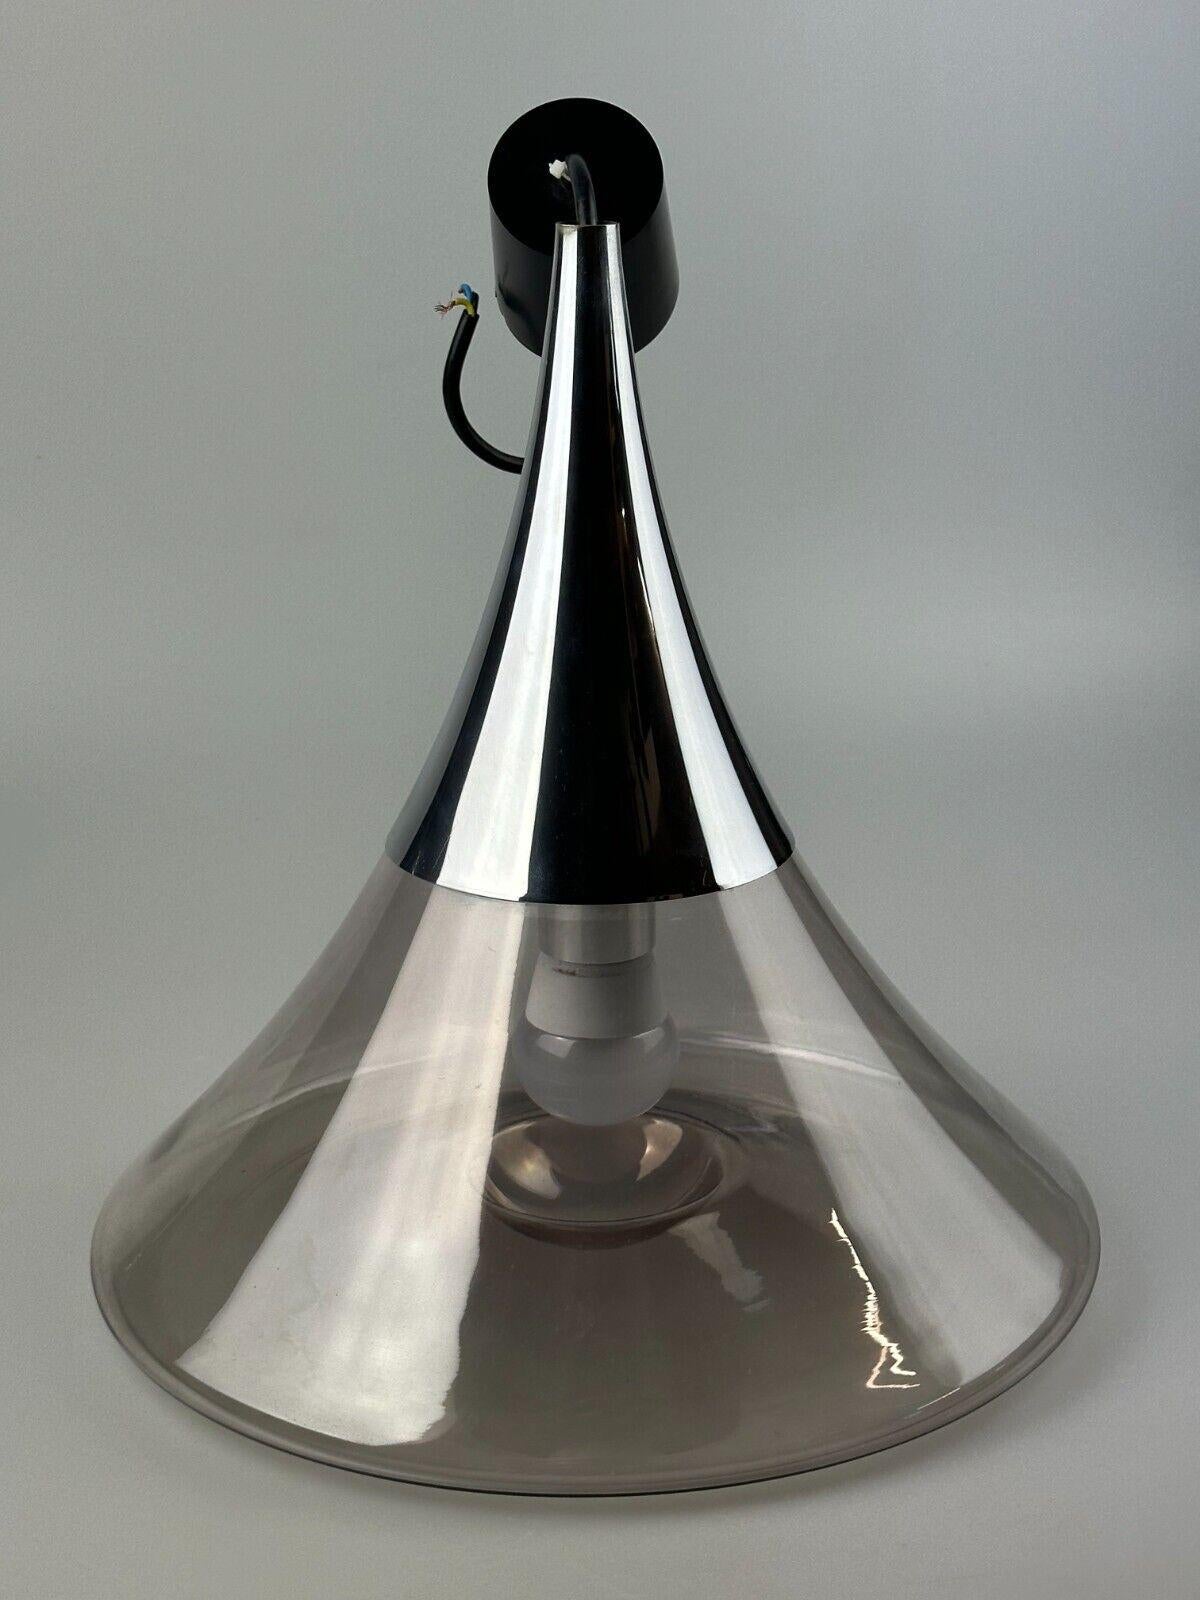 60s 70s lamp light ceiling lamp Limburg Germany glass space age design For Sale 6